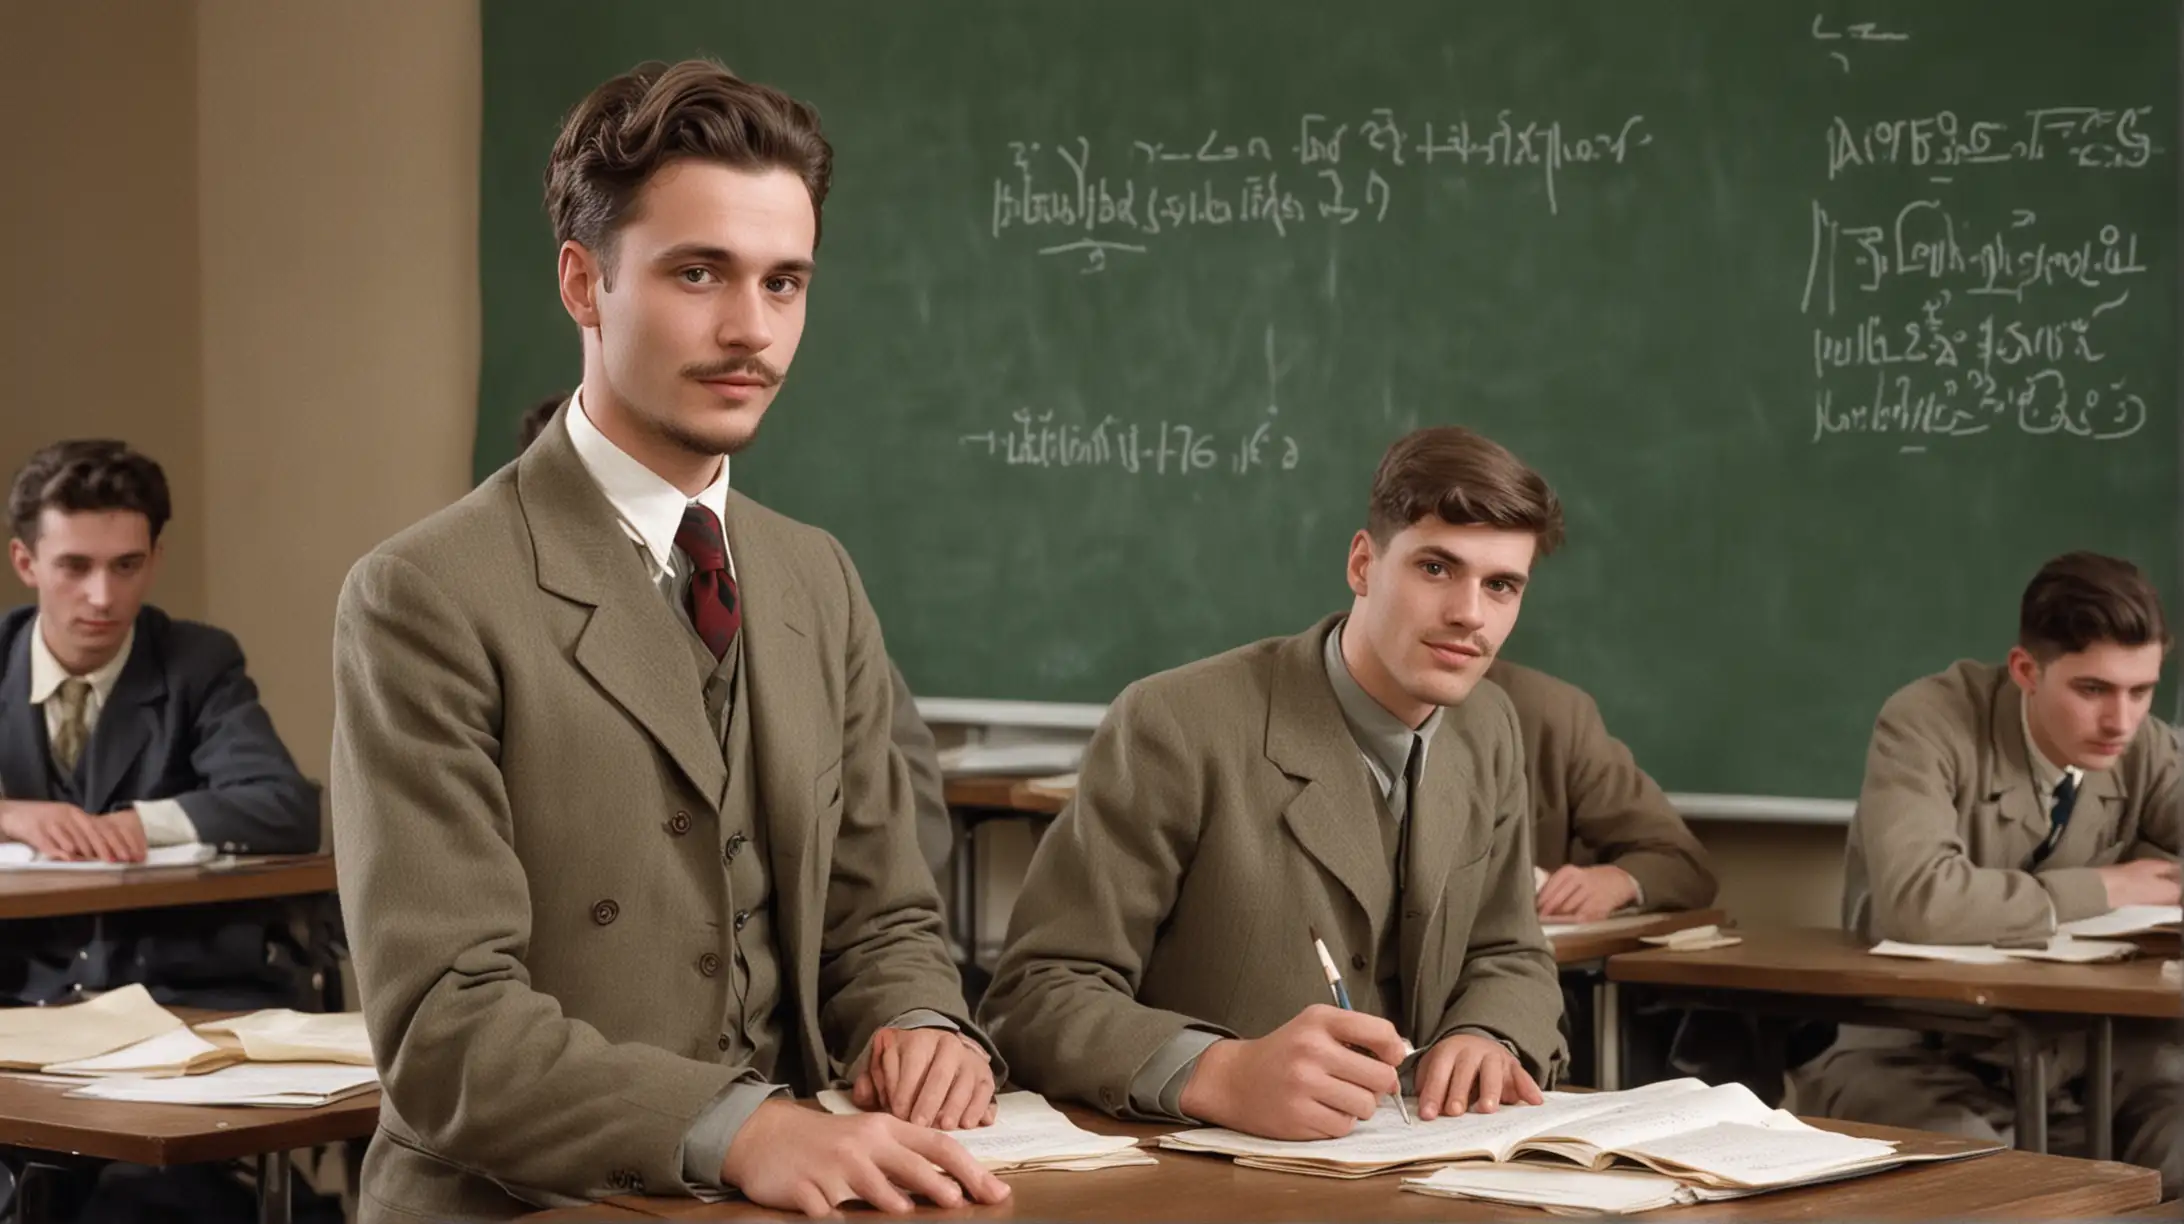 Young mathematician teaching class at university, 30 years old, short beard, Germany 1945, in color. 